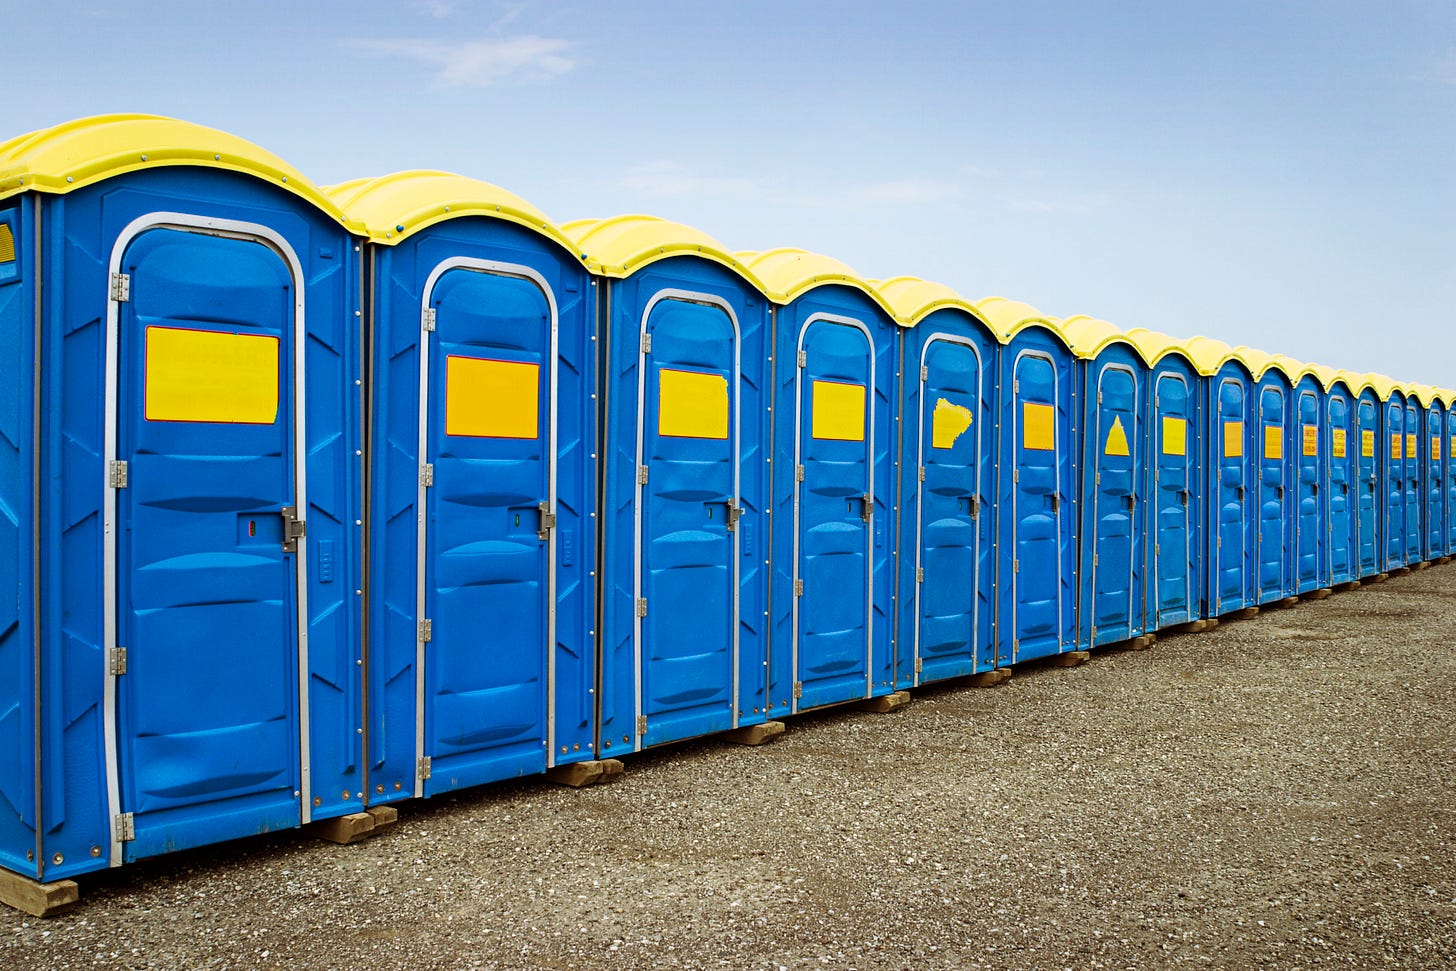 photo of porta-potties lined up next to each other